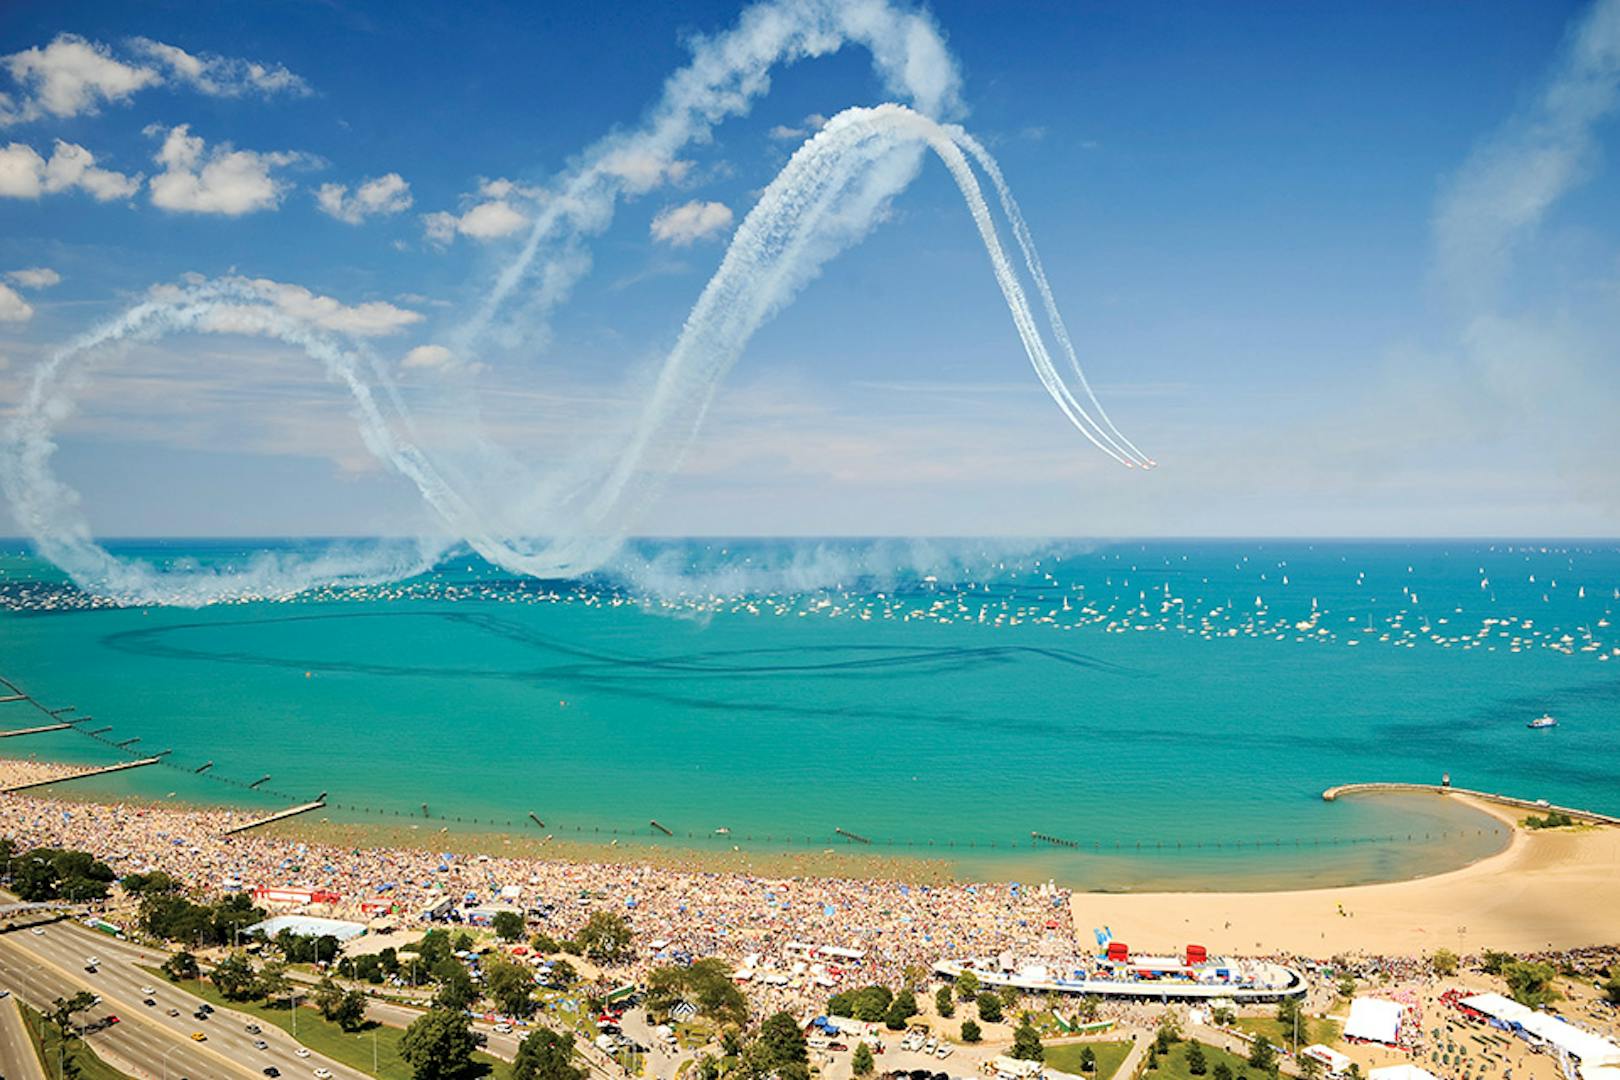 The Chicago Air and Water Show in Chicago, Illinois (photo by NAB Aerial)